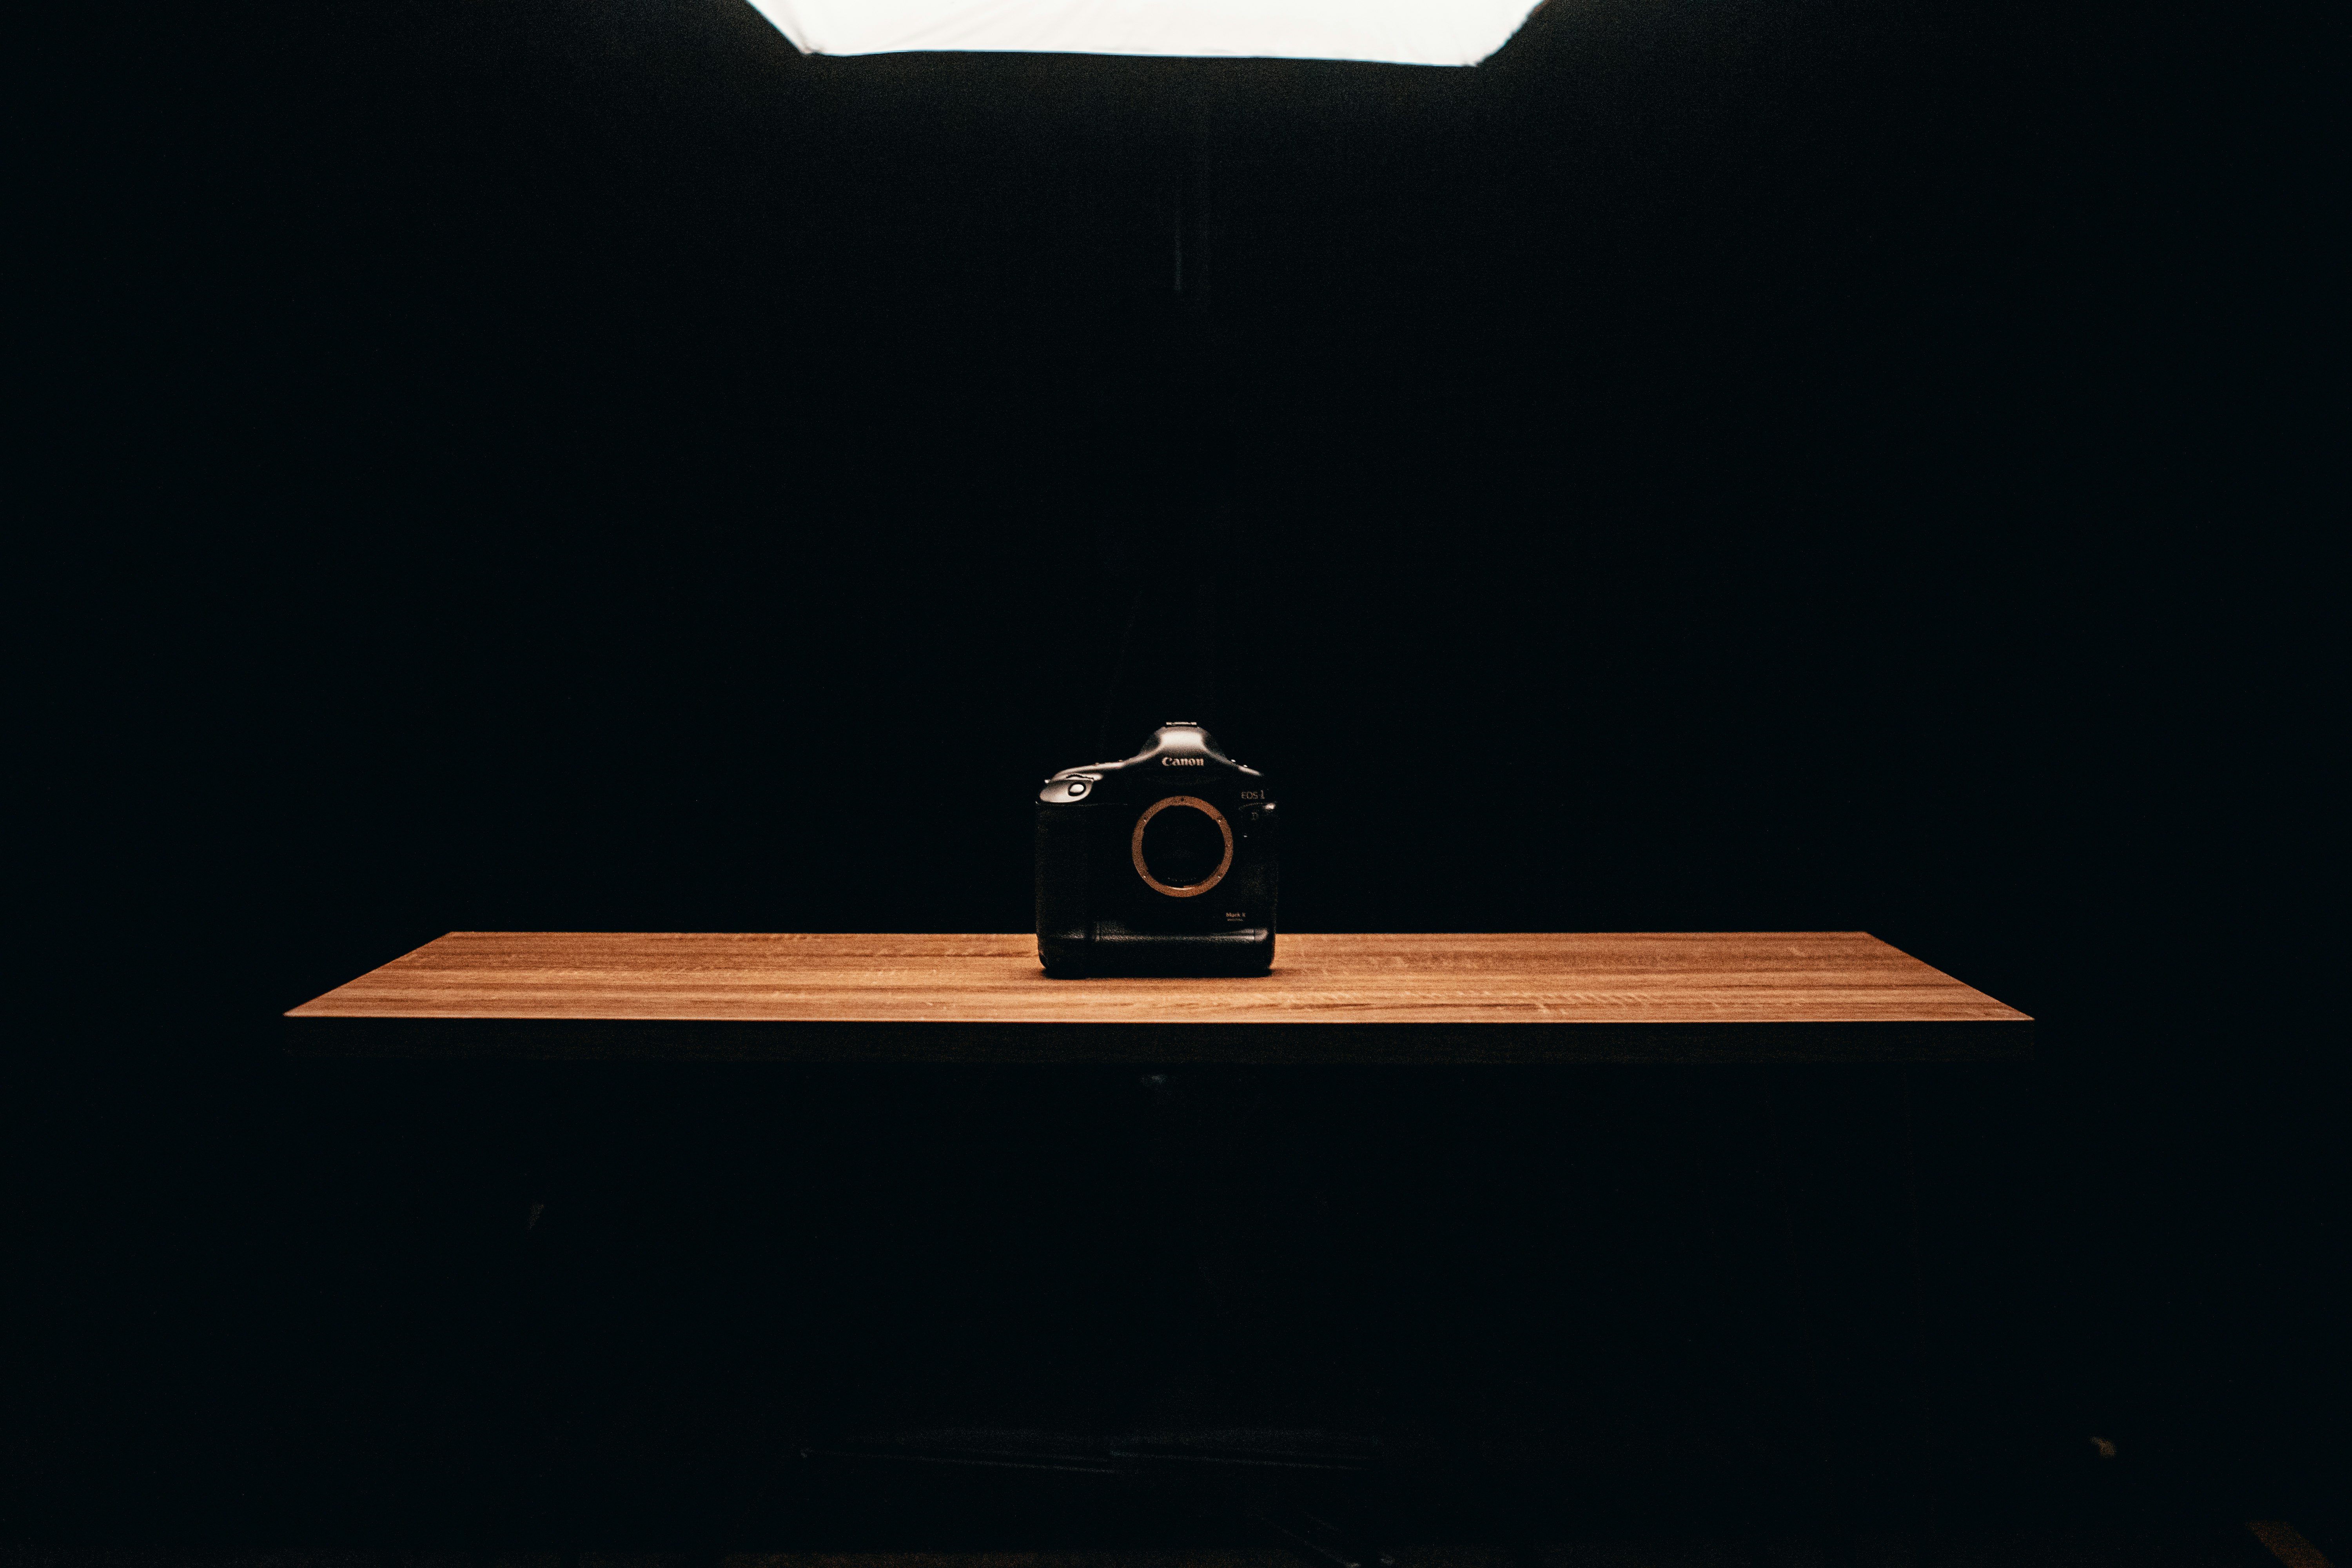 black point and shoot camera on brown wooden table